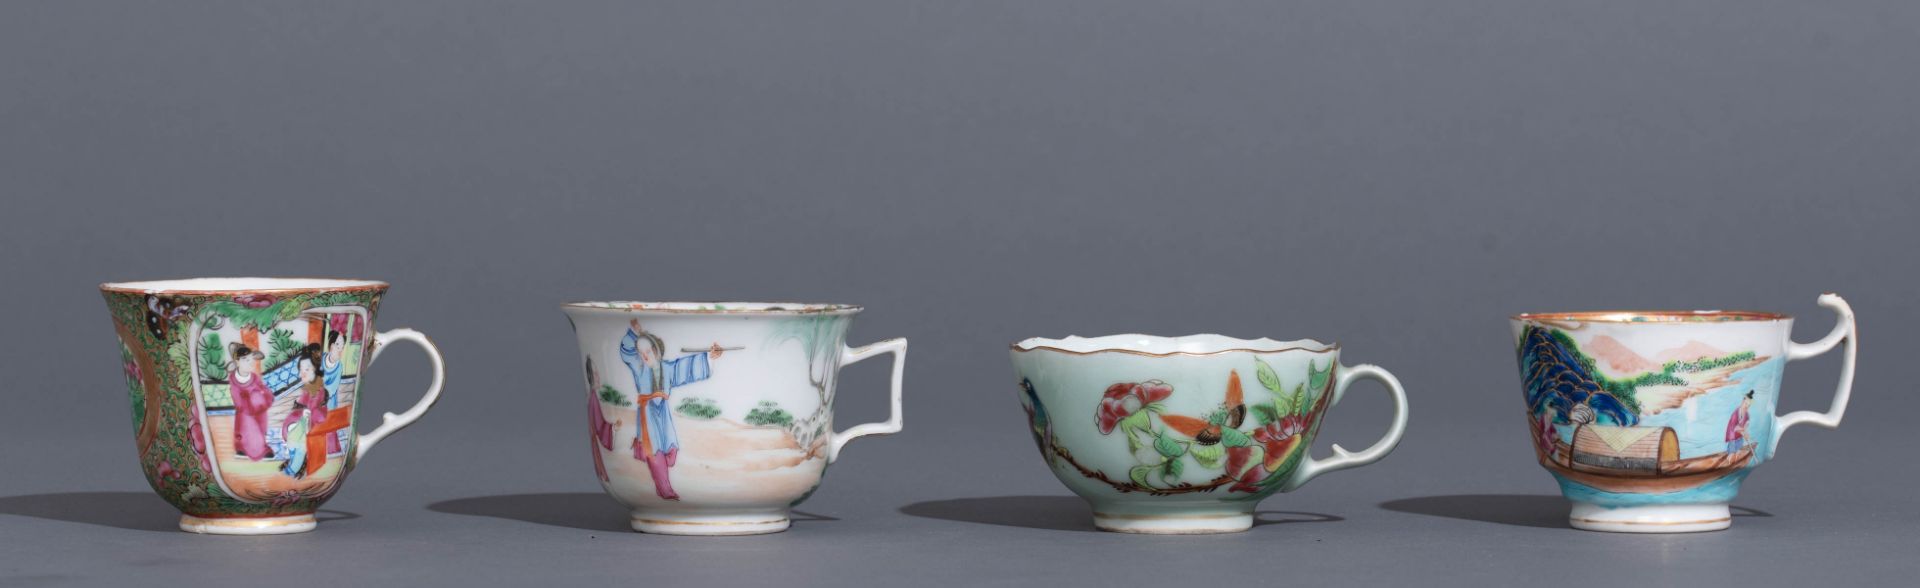 Six Chinese export porcelain Canton teacups and matching saucers - Image 21 of 62